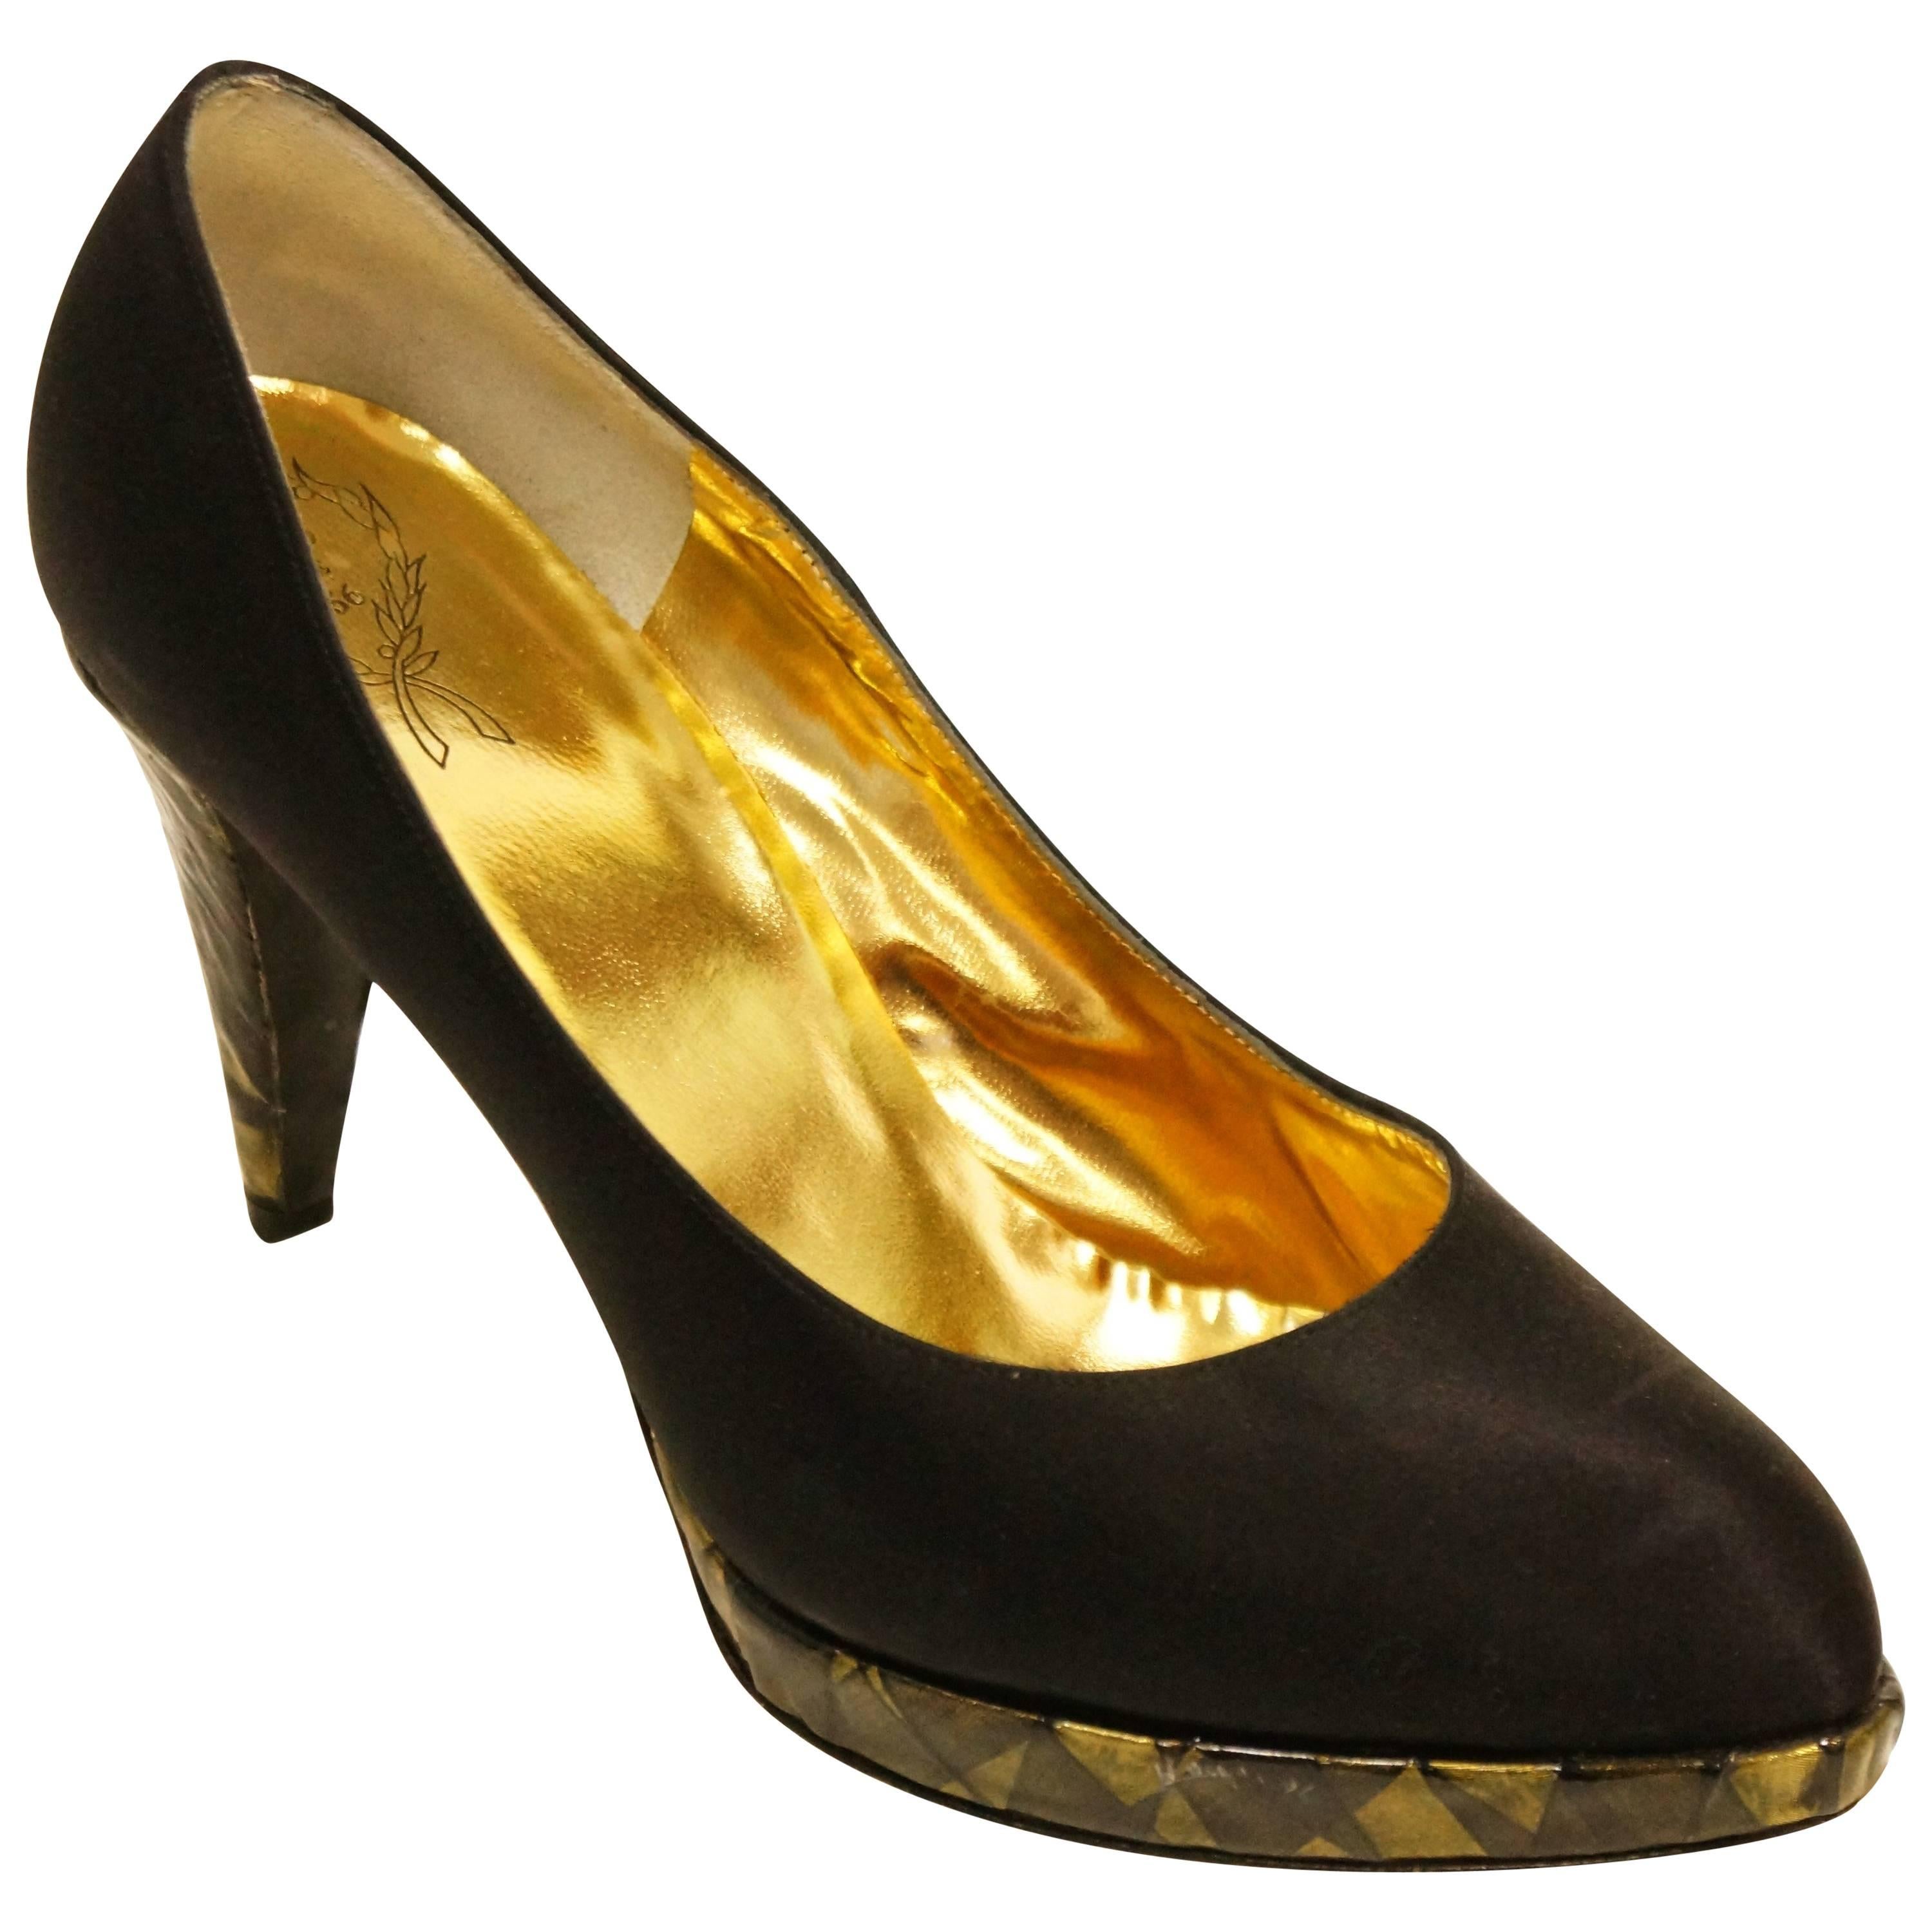 Rodo Black Satin Pumps with Gold Stained Glass Style Heel, 1980s For Sale